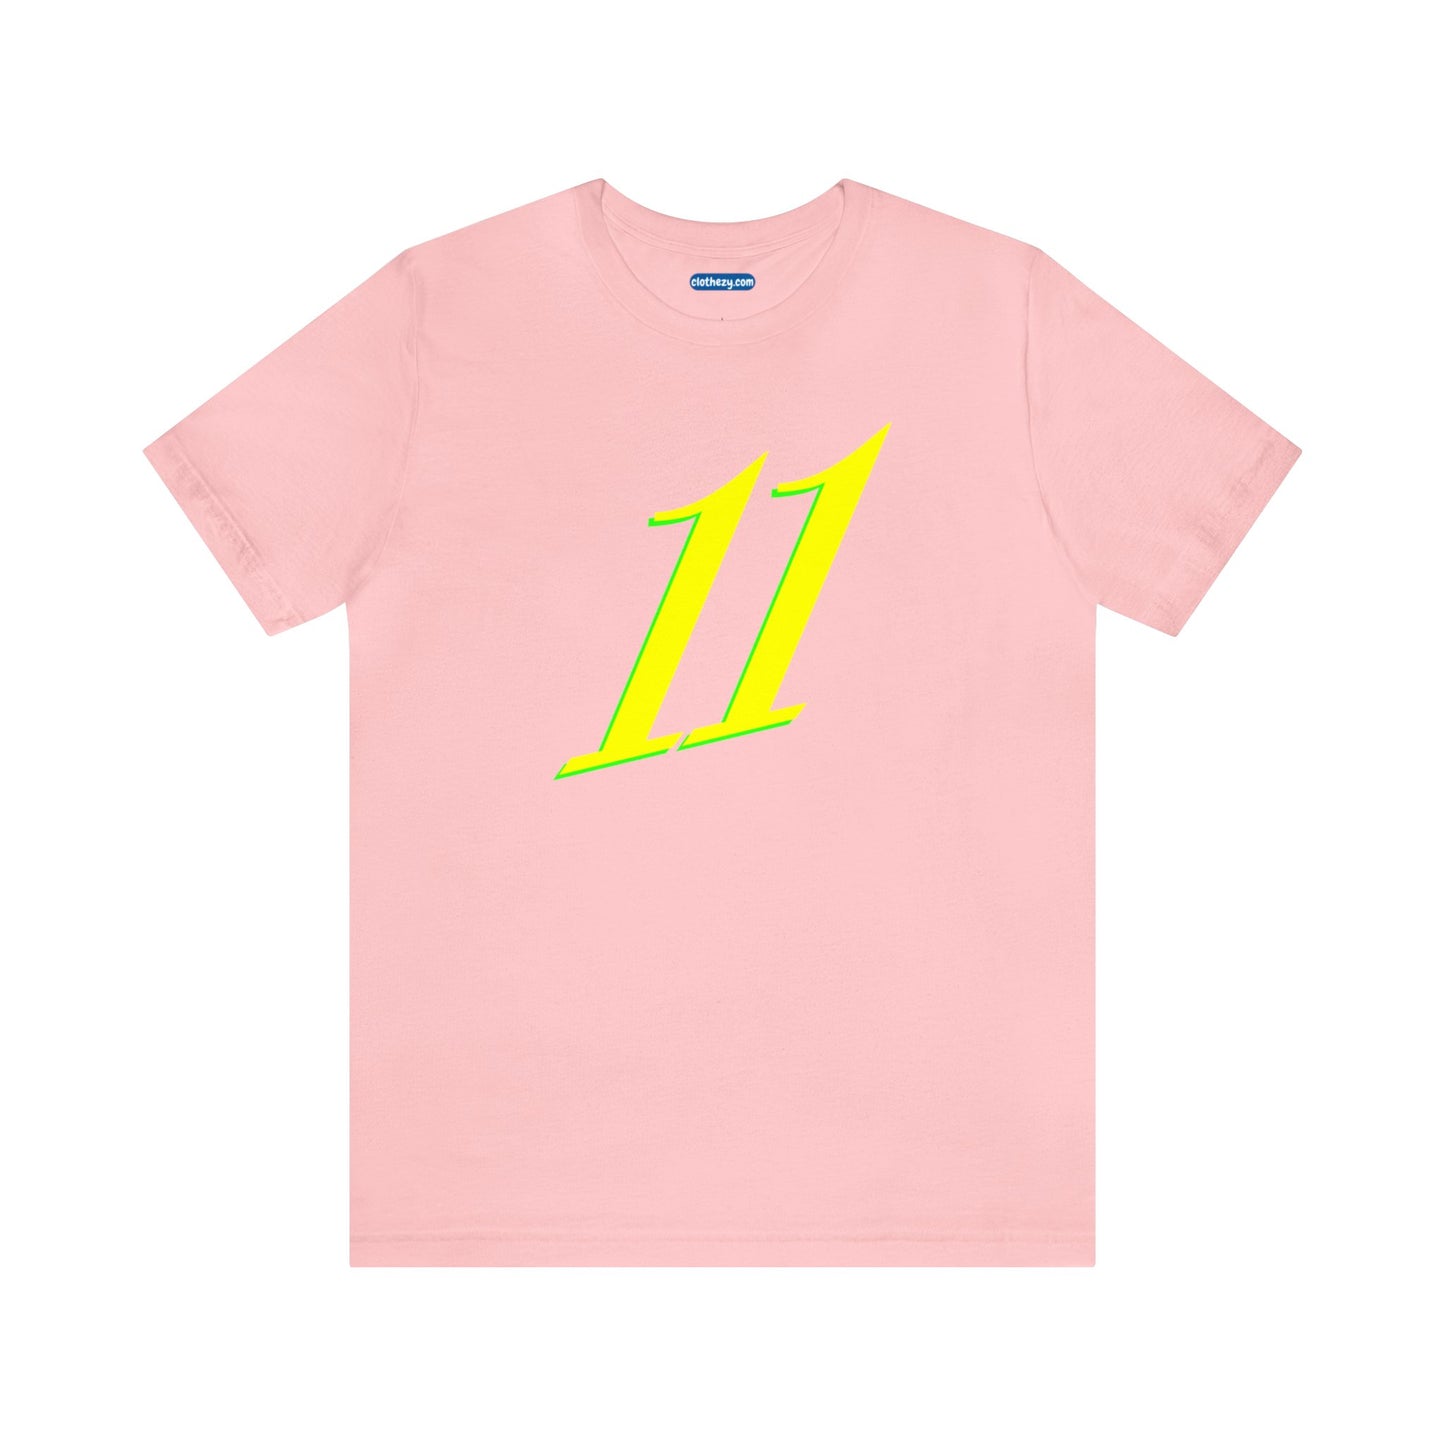 Number 11 Design - Soft Cotton Tee for birthdays and celebrations, Gift for friends and family, Multiple Options by clothezy.com in Pink Size Small - Buy Now